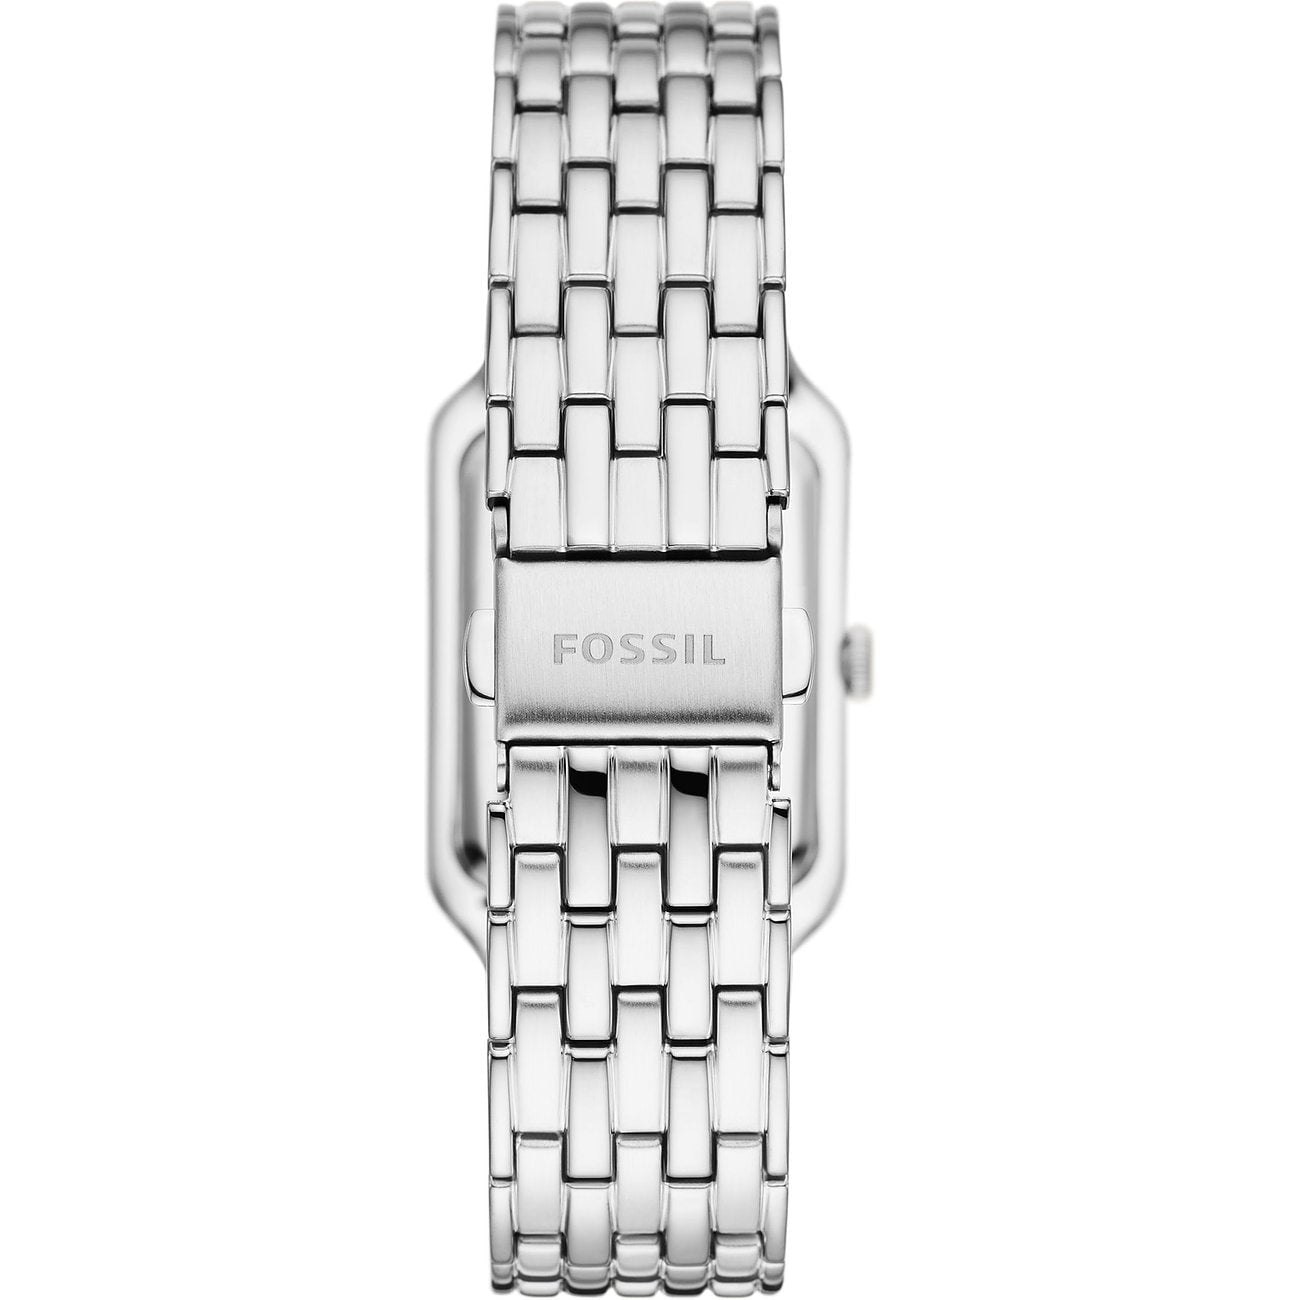 FOSSIL FOSSIL ES5306